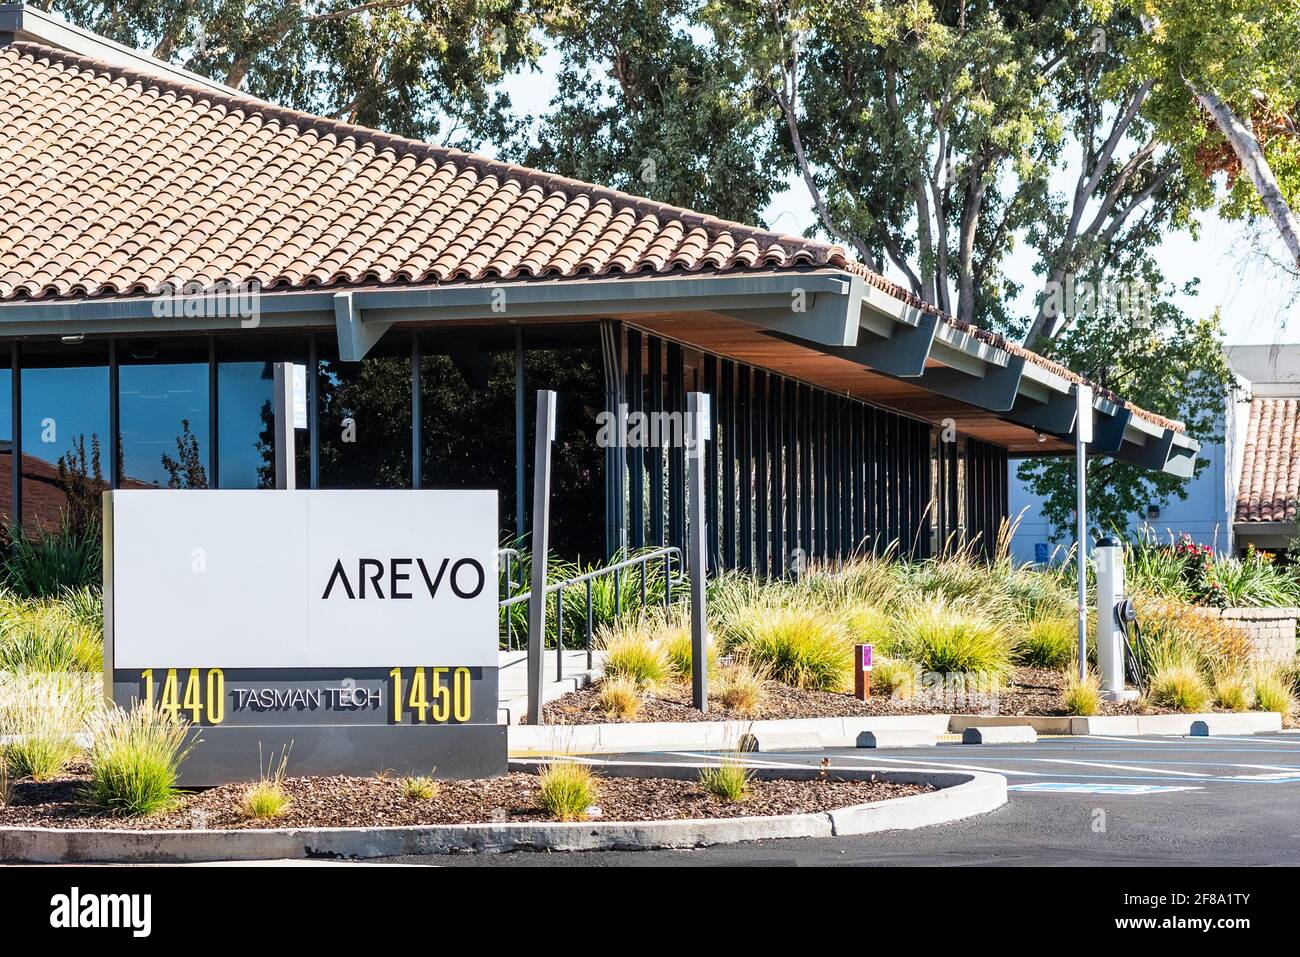 Sep 24, 2020 Milpitas / CA / USA - Arevo headquarters in Silicon Valley; Arevo, Inc. develops 3D printing technology Stock Photo